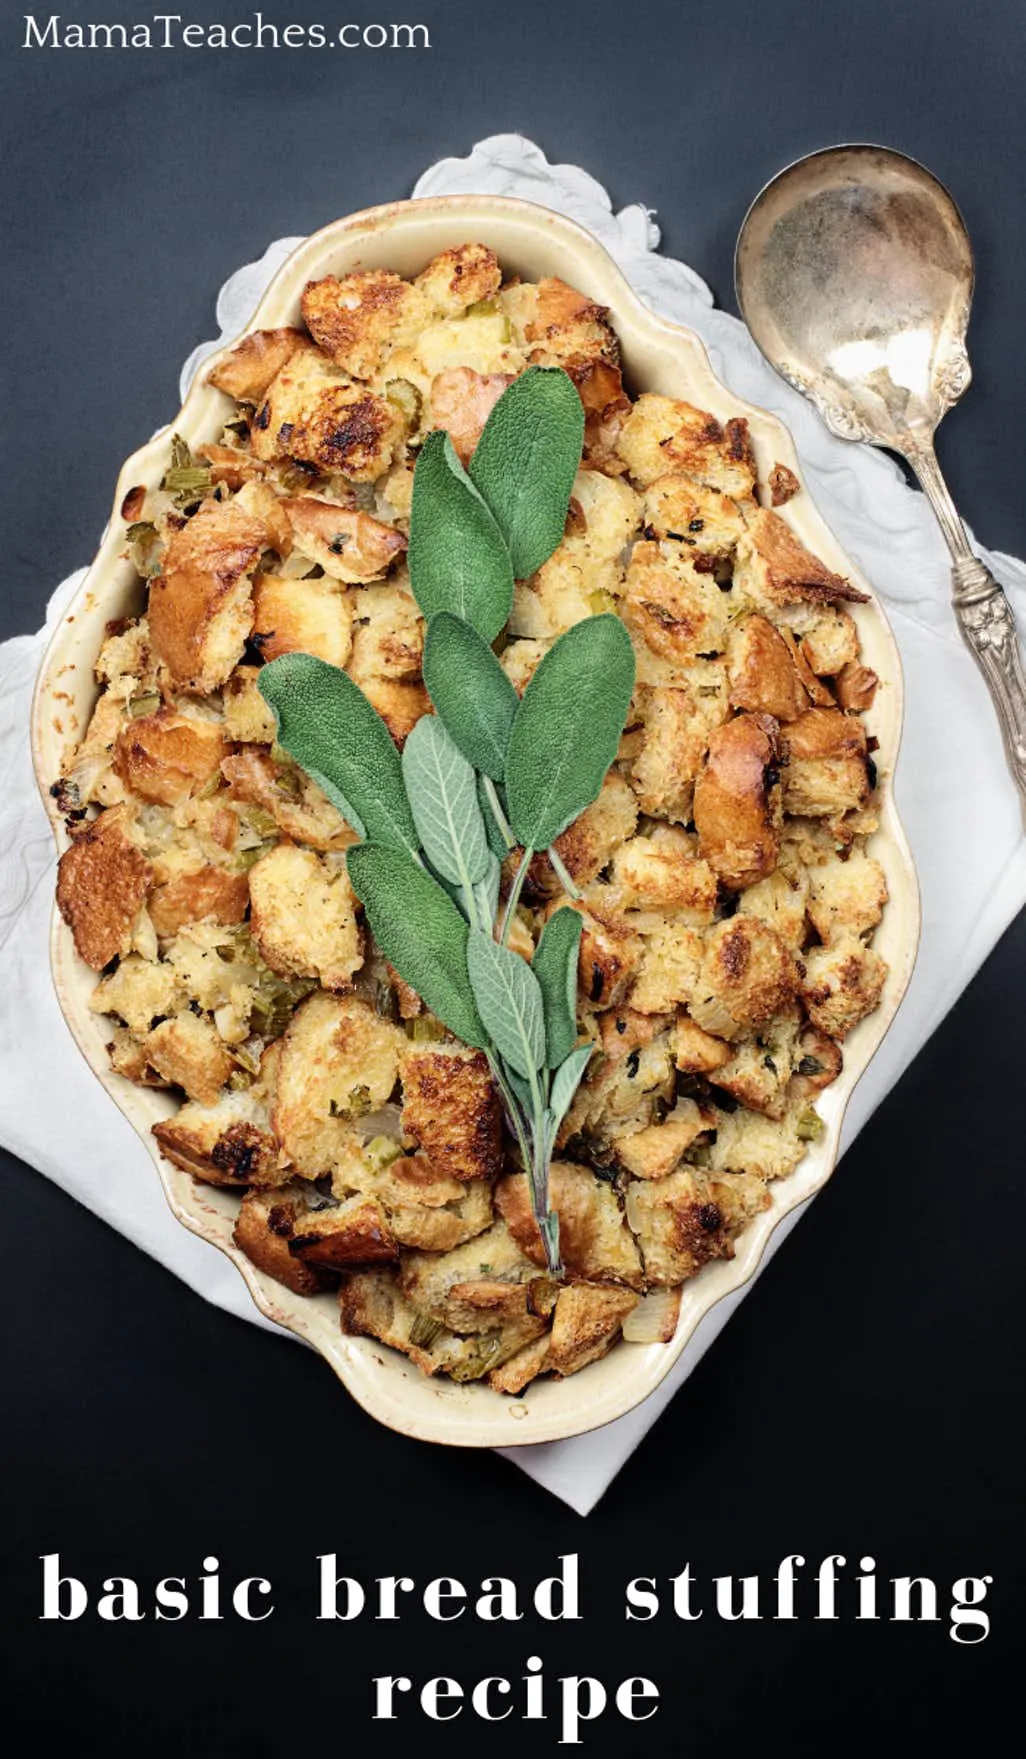 Easy Bread Stuffing Recipe the Whole Family will Love